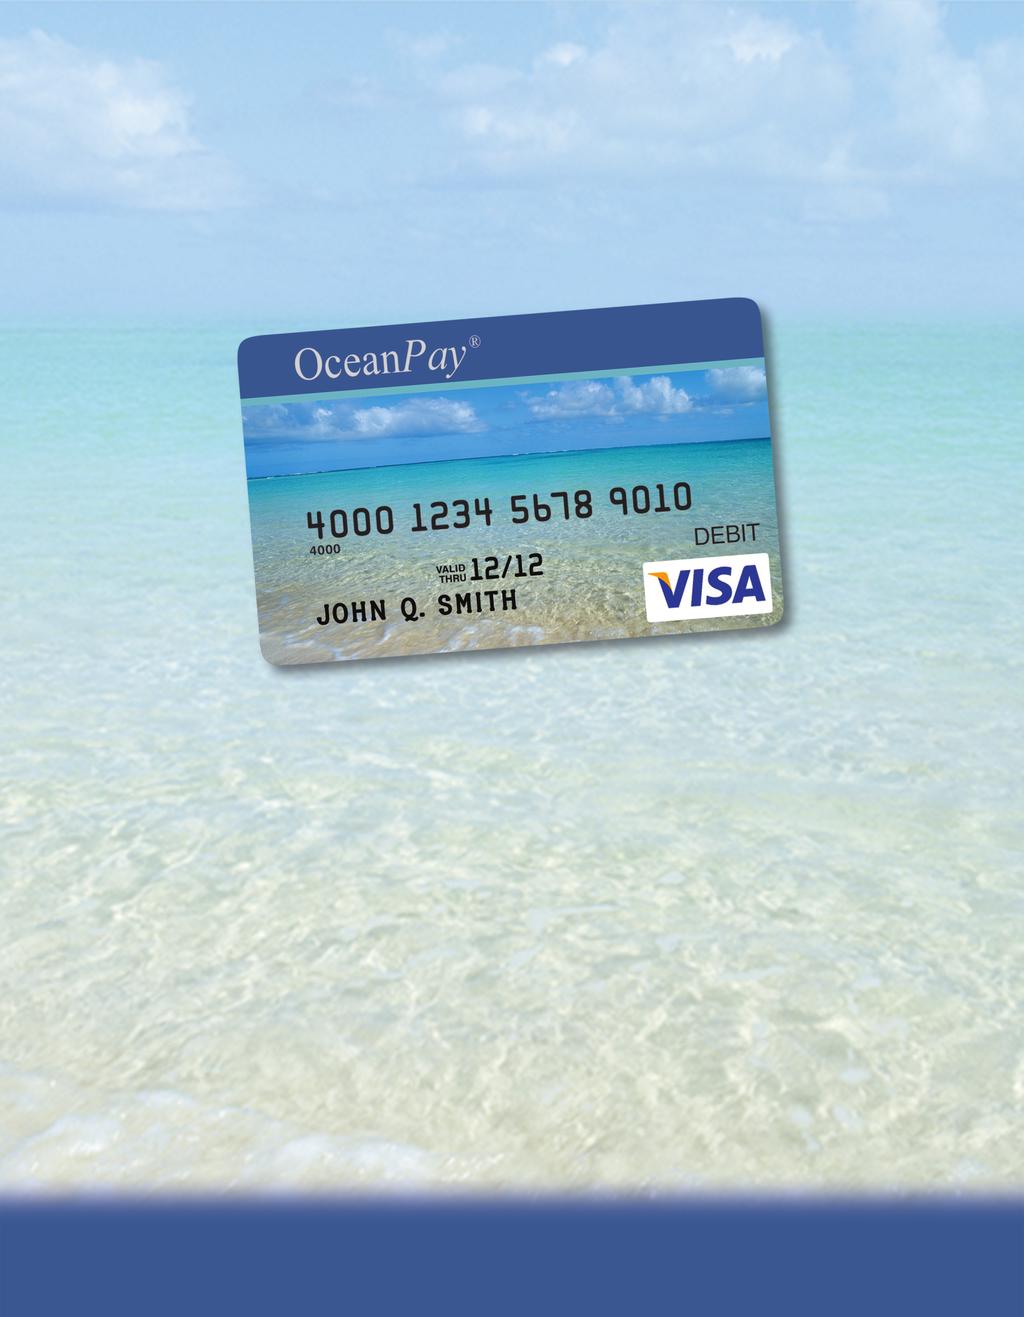 OceanPay a direct deposit payroll card Your wages are deposited directly to your OceanPay Card, which can be used worldwide at over 20 million locations everywhere Visa debit cards are accepted.